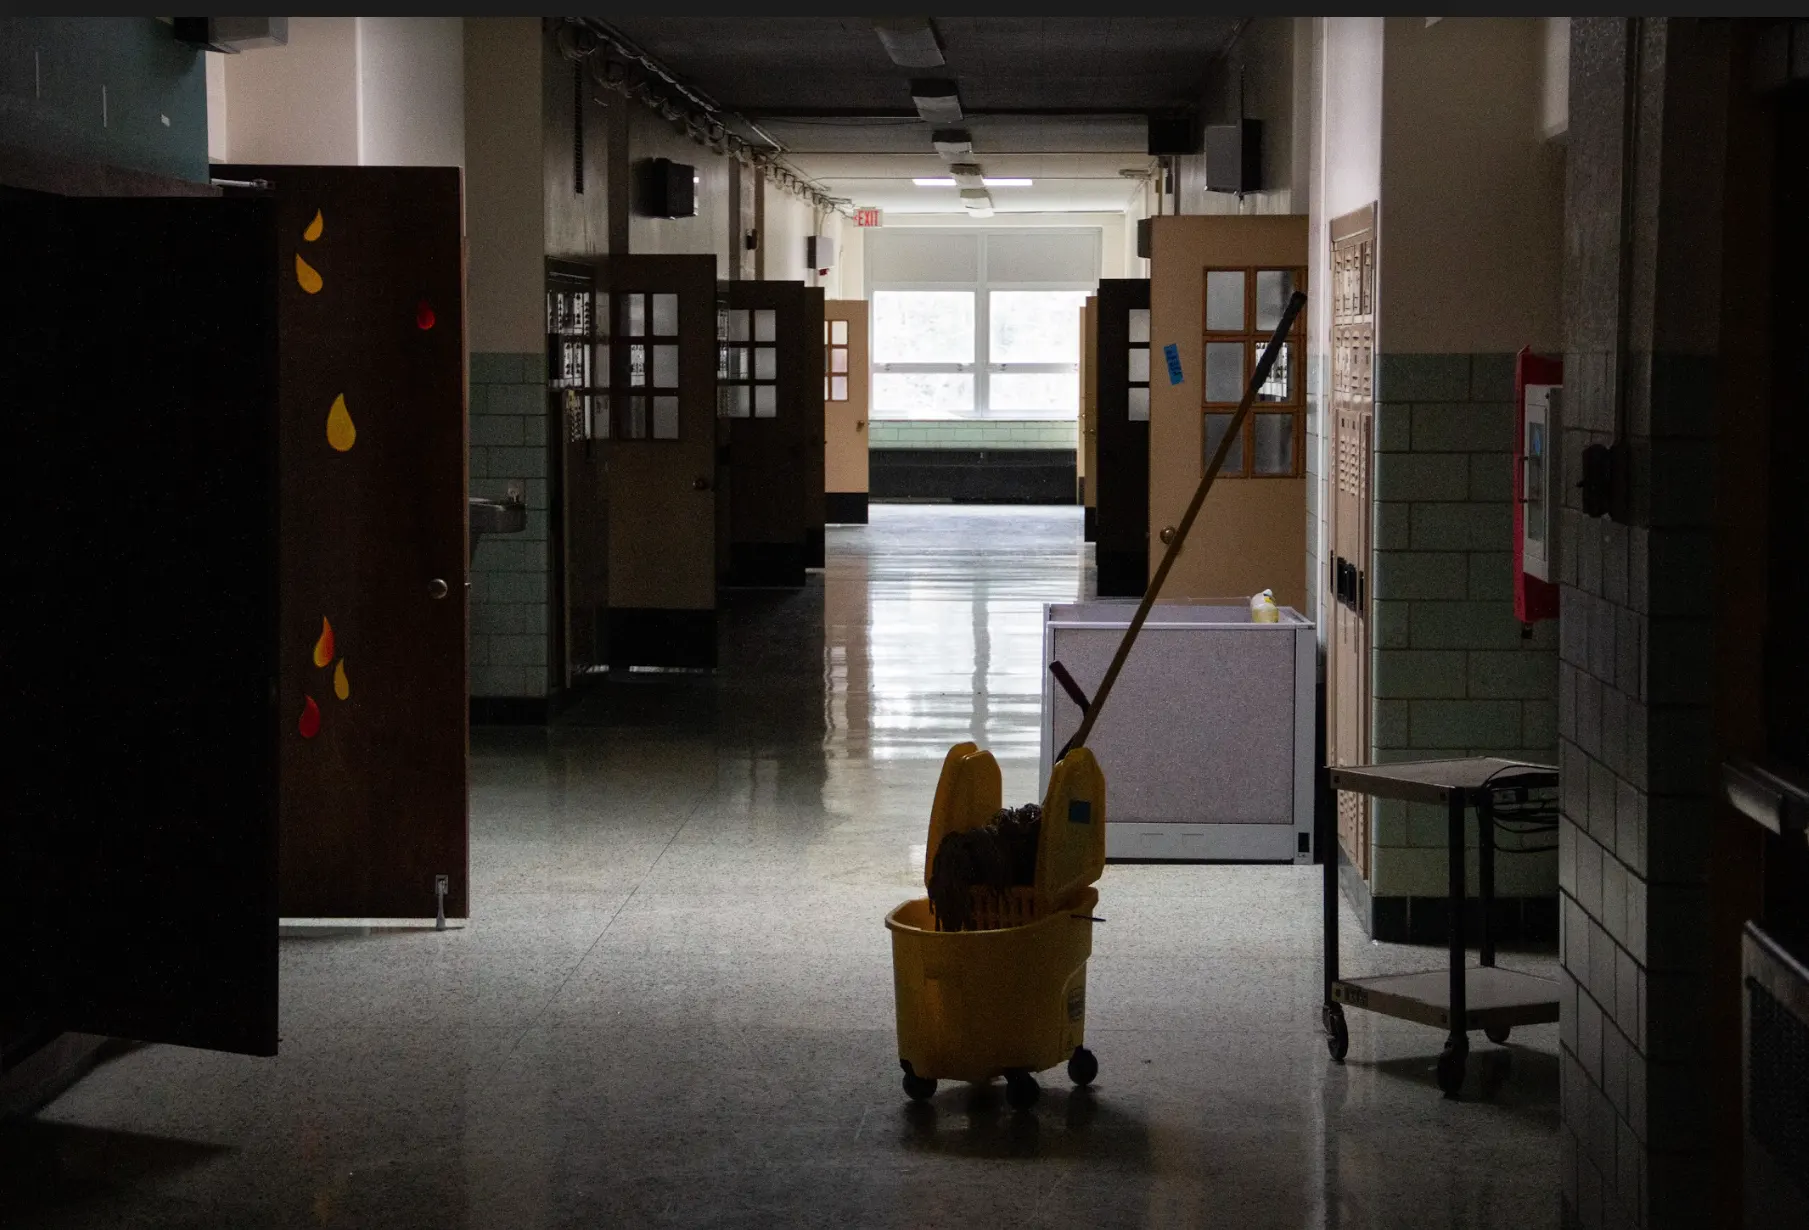 Interior space of 125 royal ave showing old school hallways with janitors bucket and mop